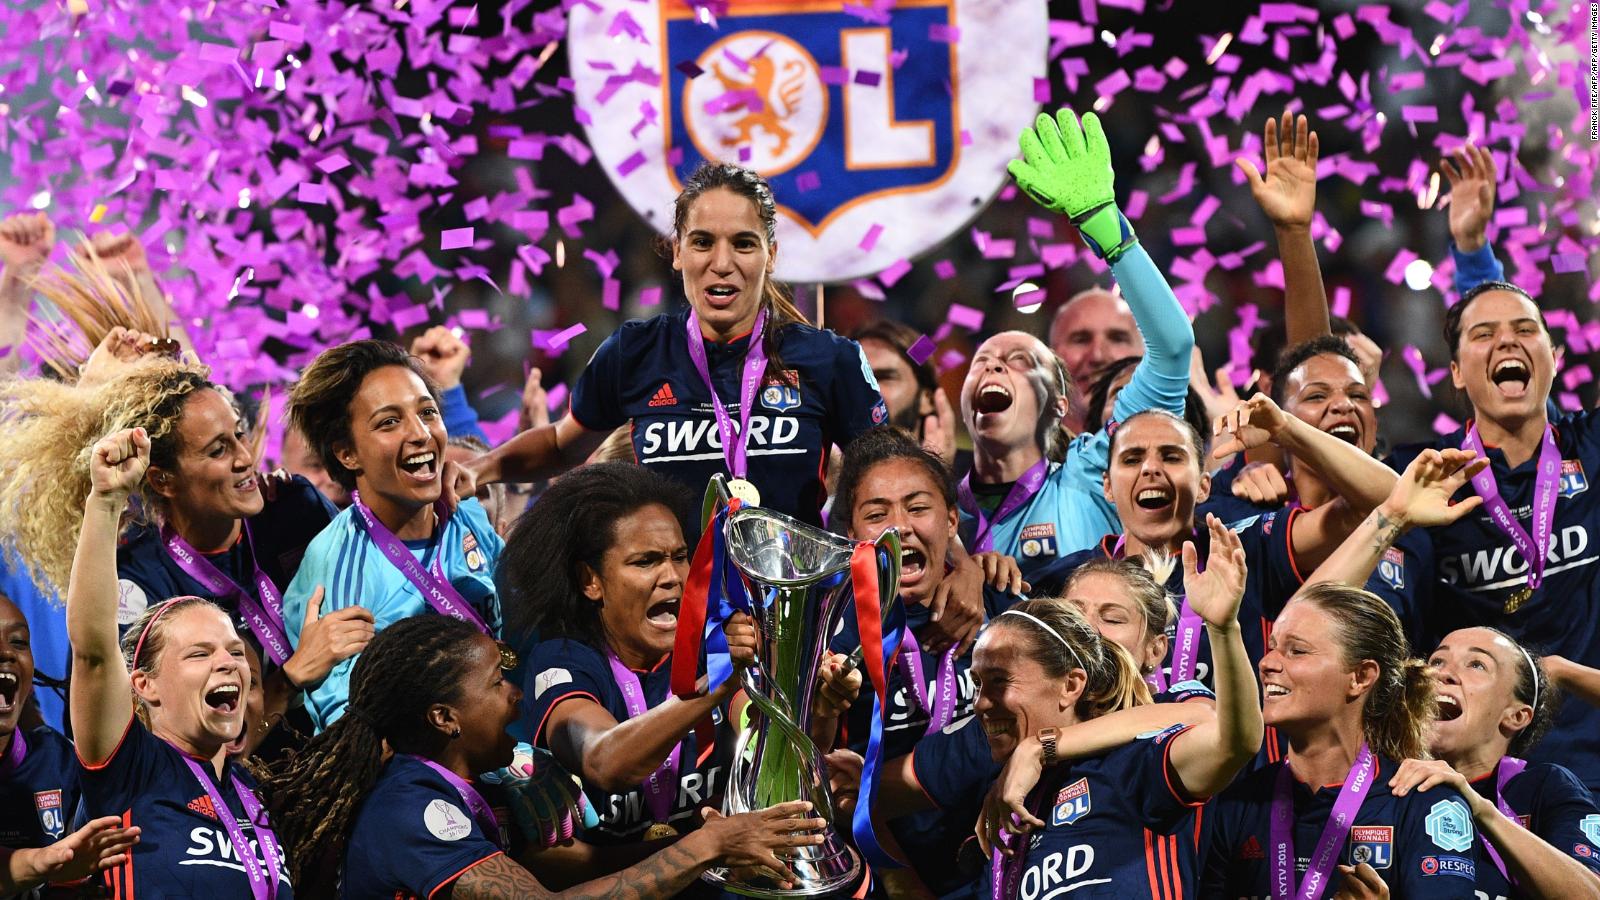 champions for women